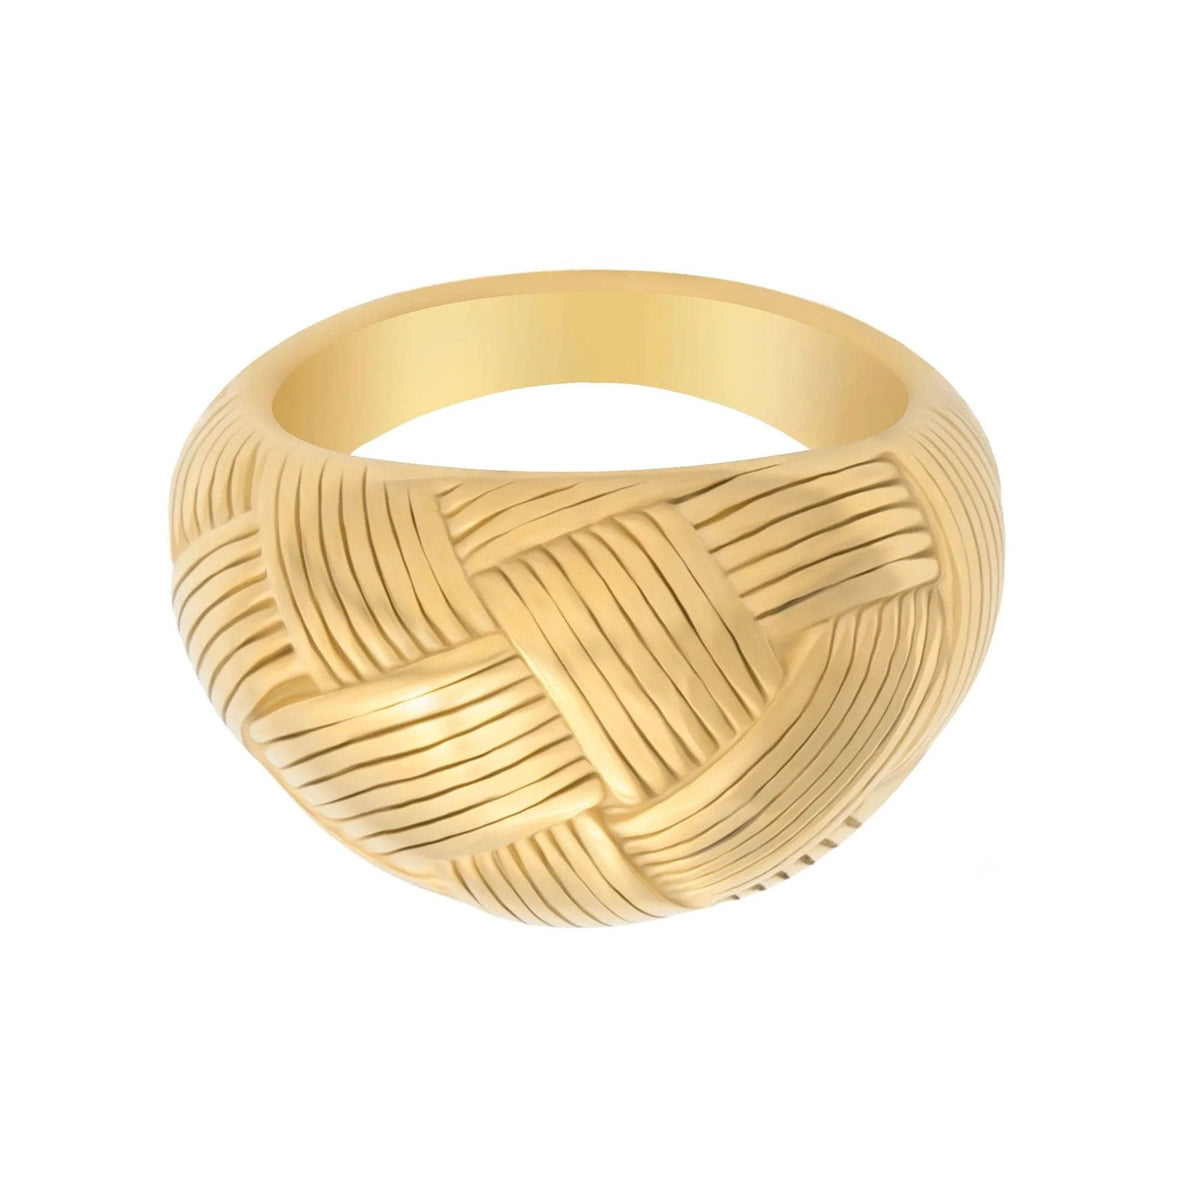 BohoMoon Stainless Steel Stefania Ring Gold / US 6 / UK L / EUR 51 (small)